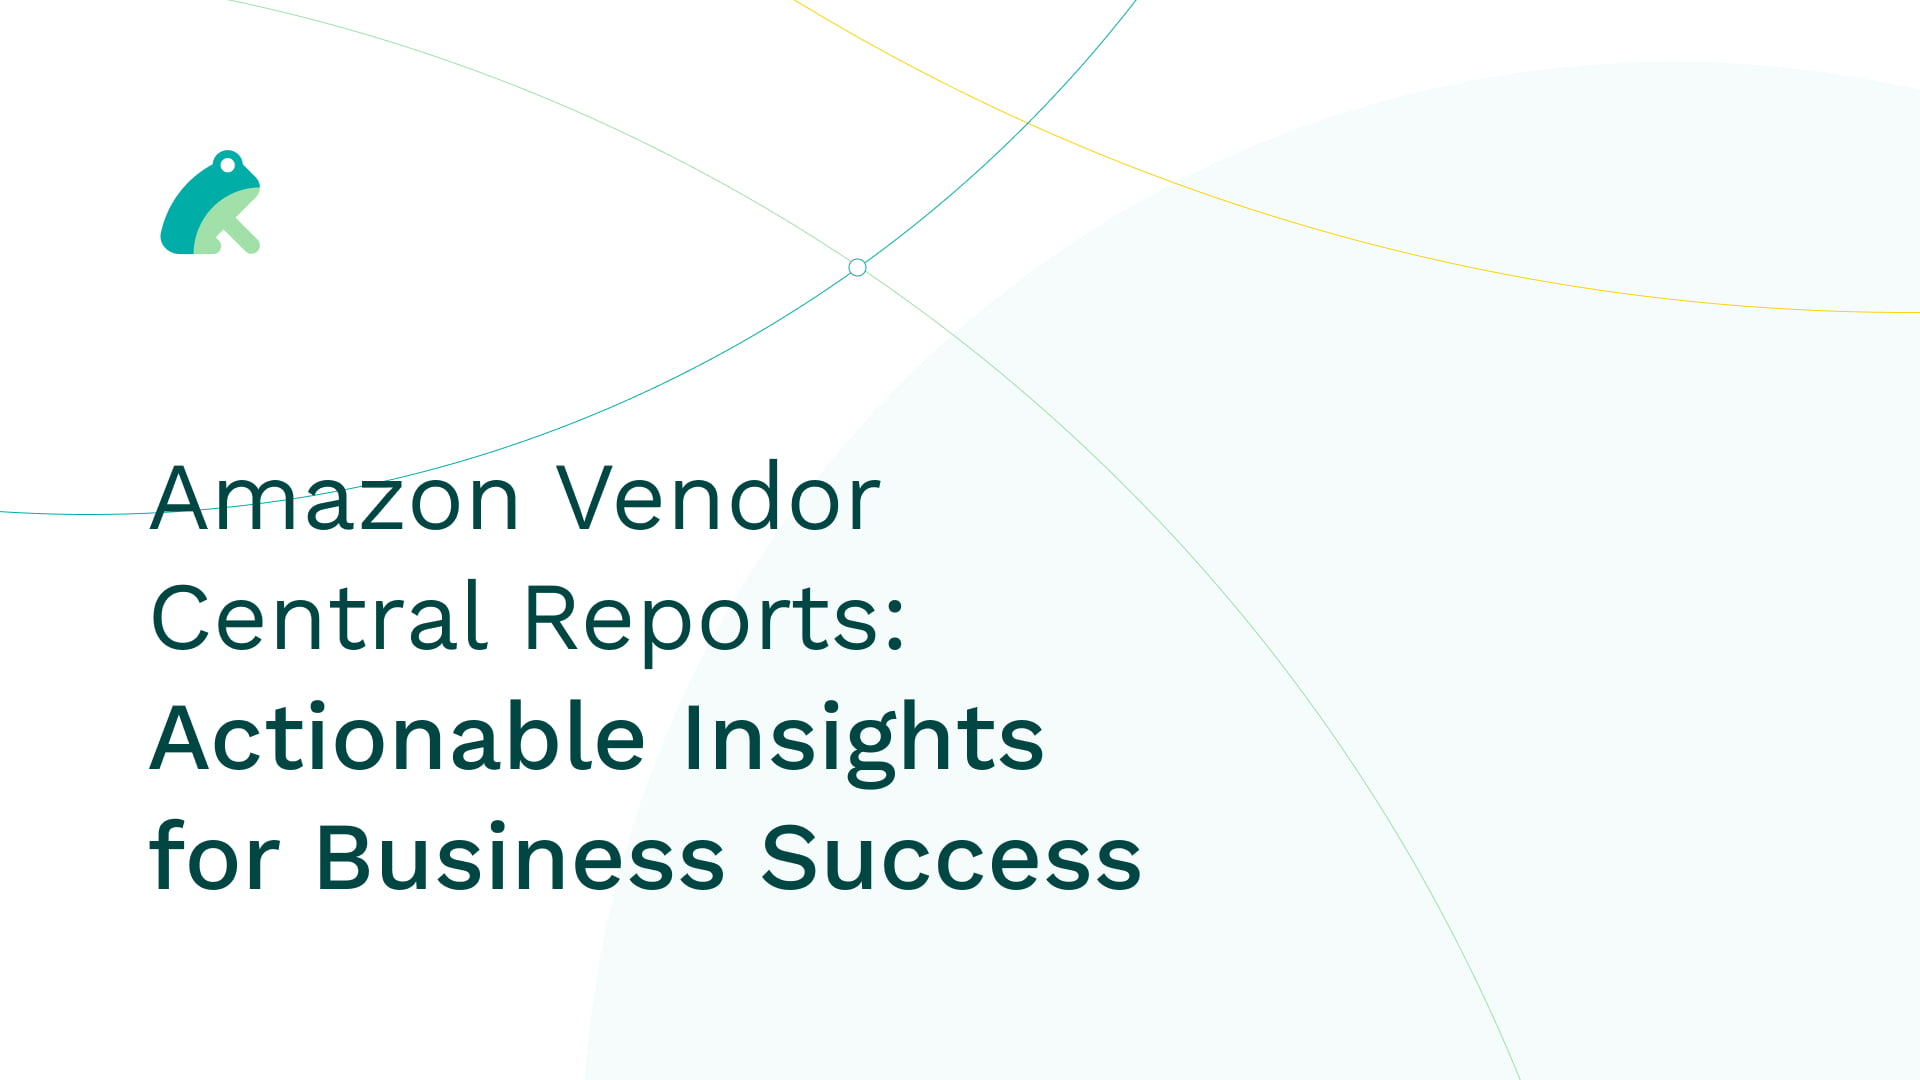 Amazon Vendor Central Reports: Actionable Insights for Business Success